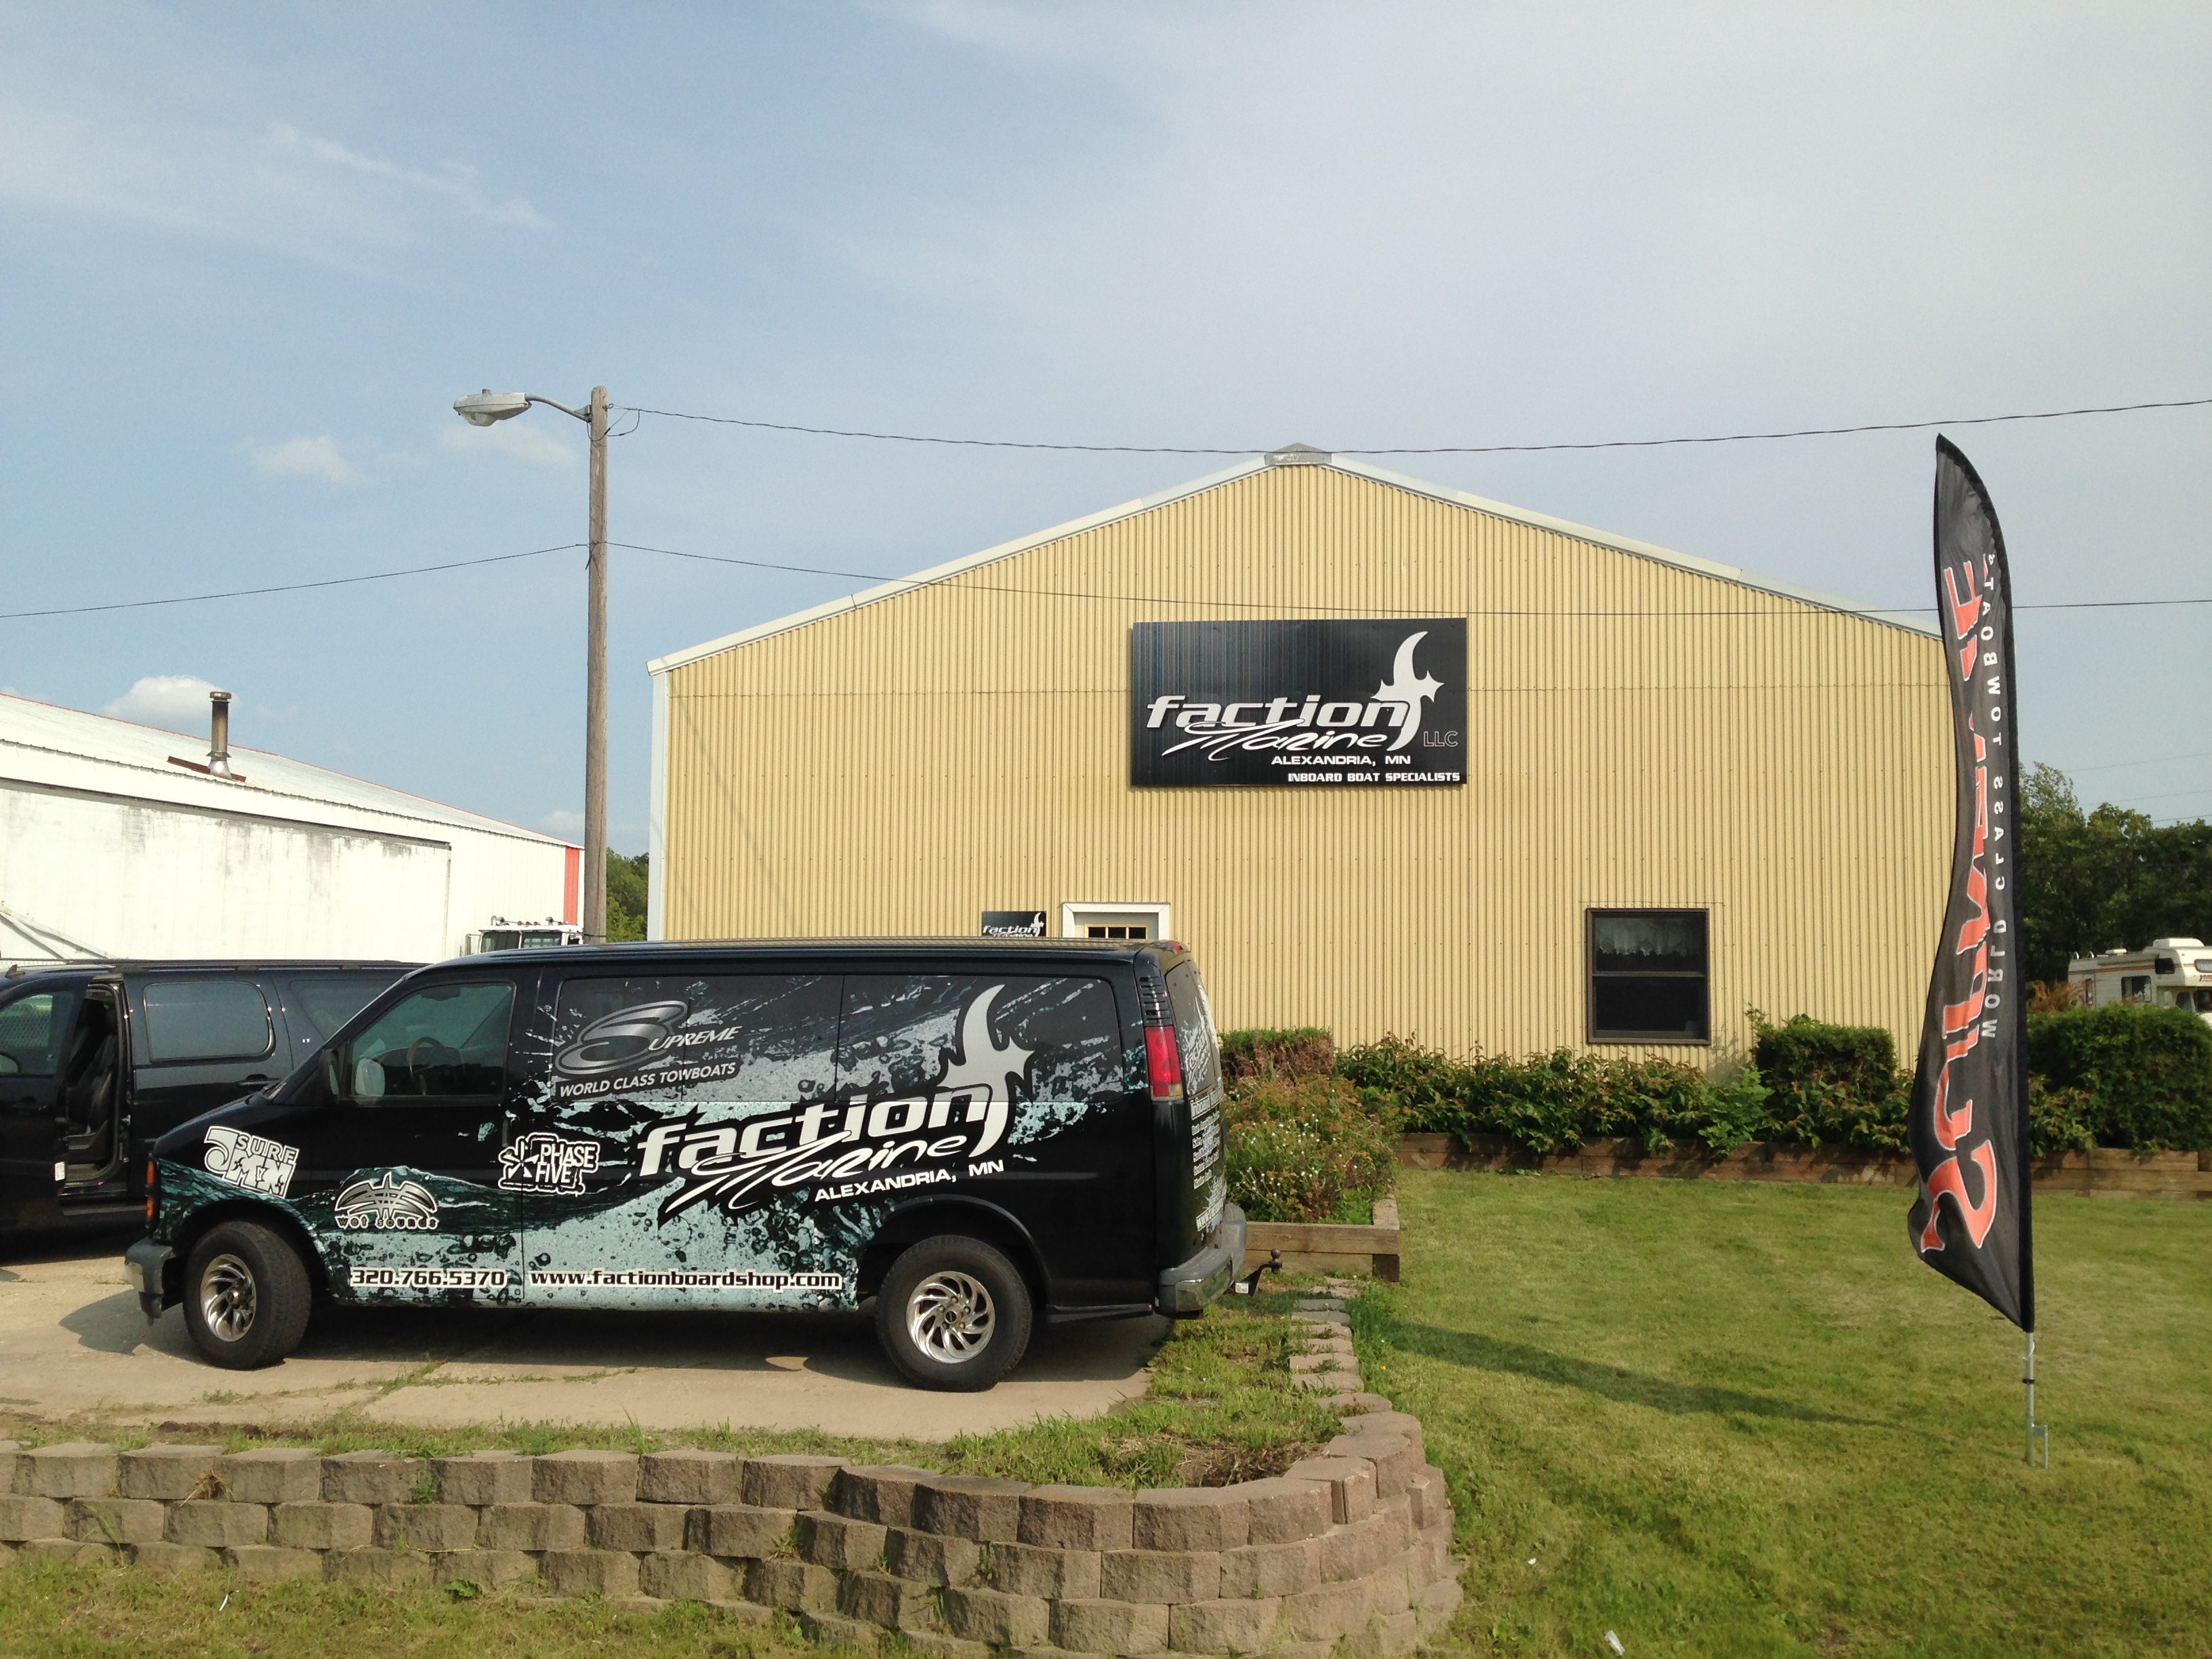 Custom Signs, Flags, and Vehicle Wraps from Signmax 